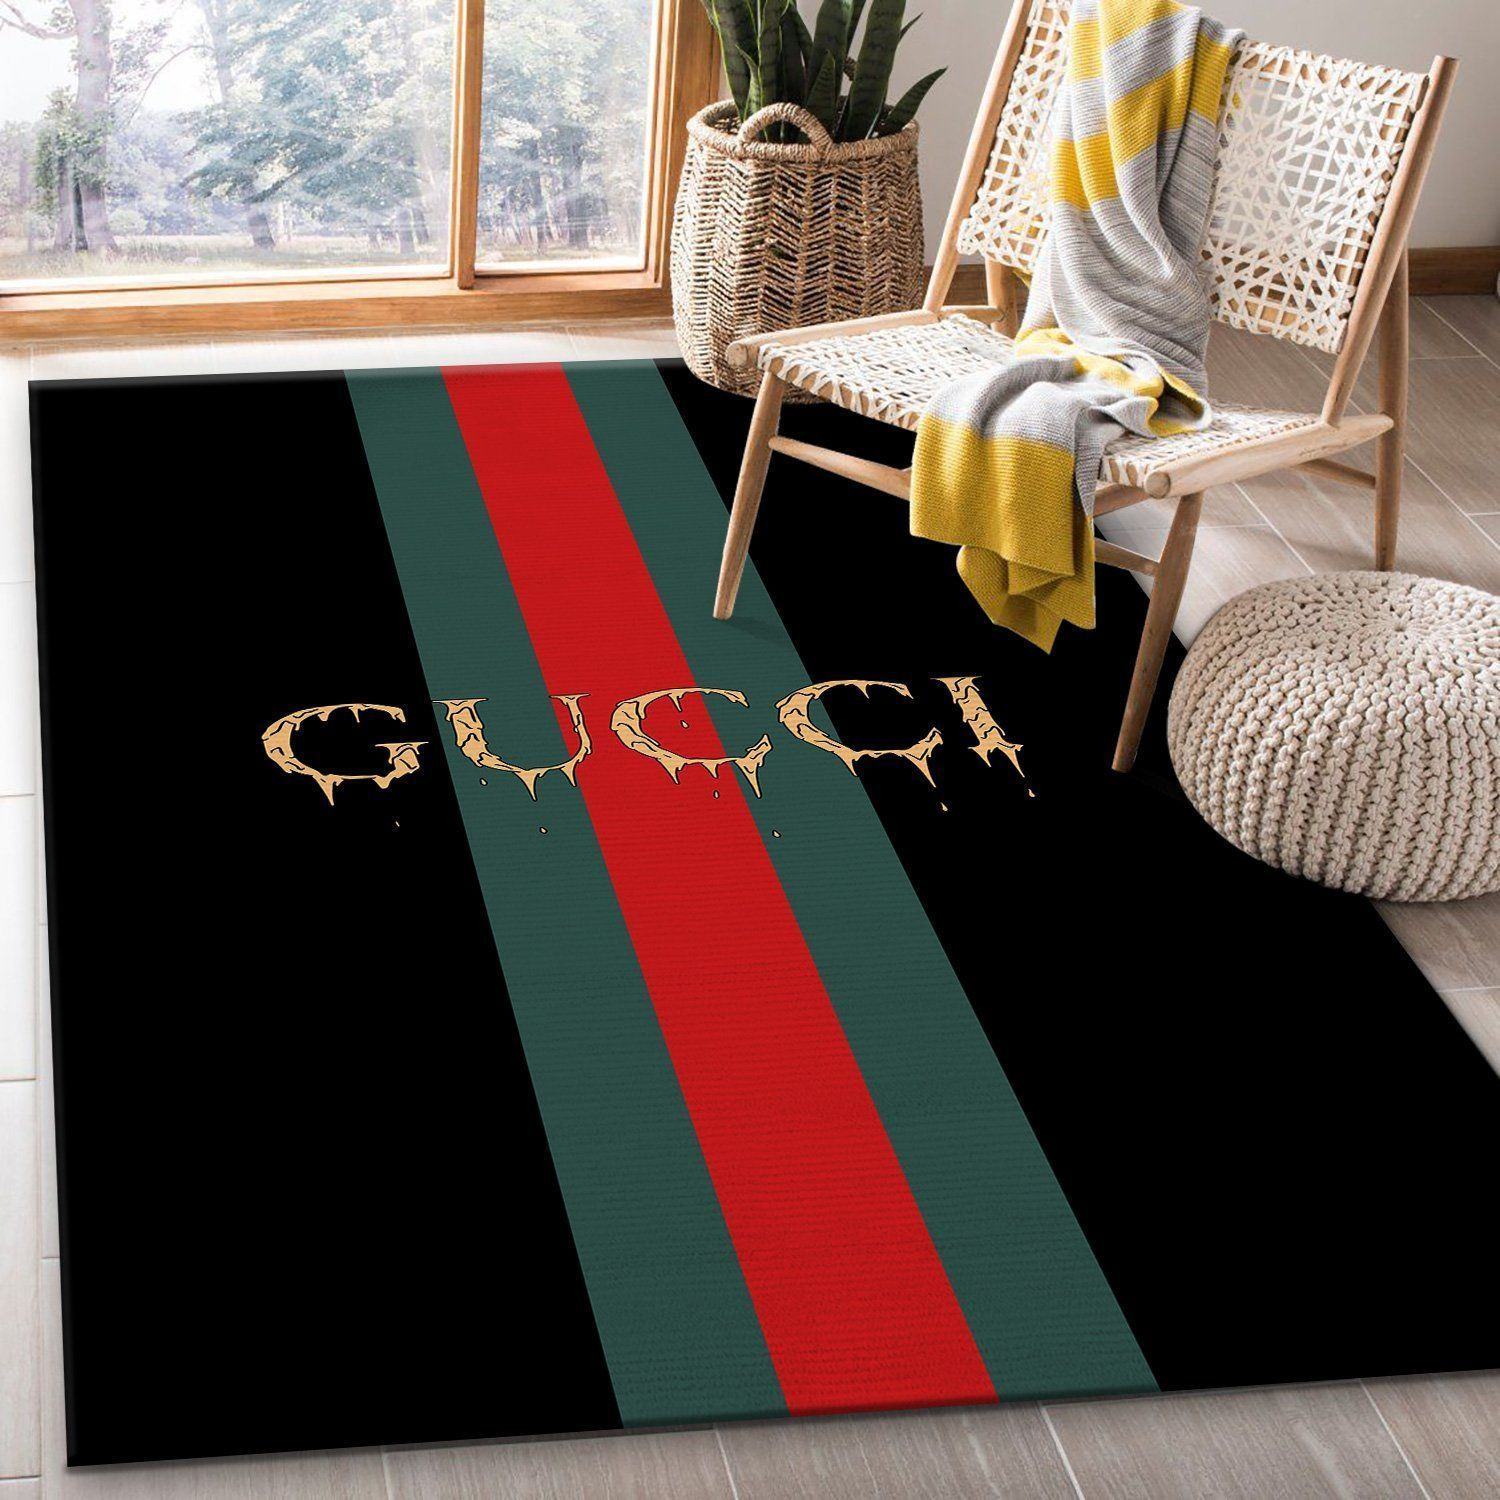 Grime gucci area rugs living room carpet fn131103 christmas gift floor decor the us decor